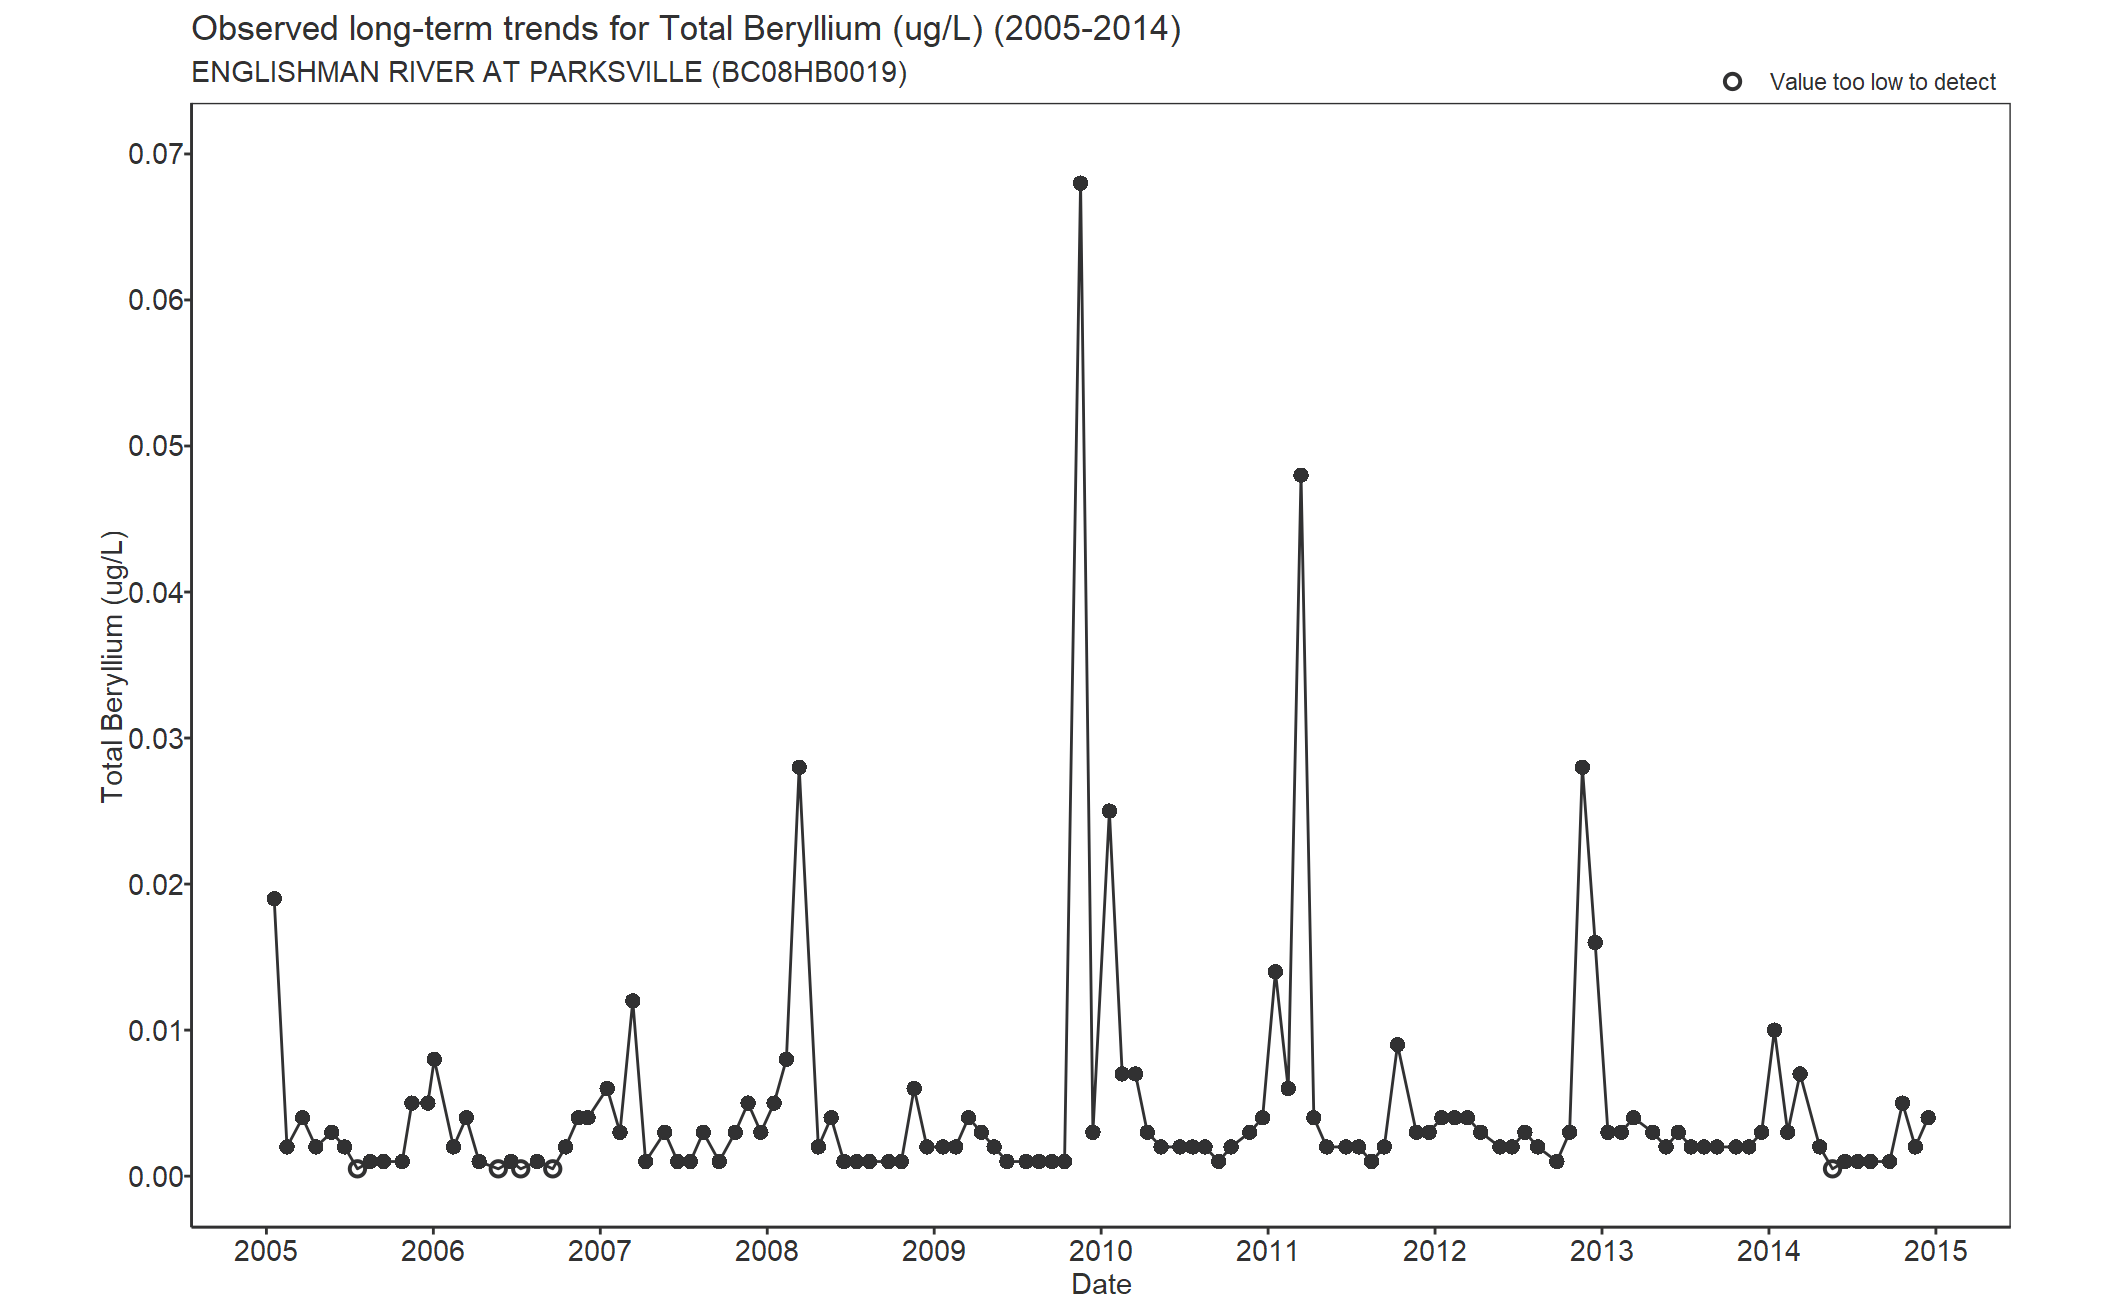 Observed long-term trends for Total Beryllium (2005-2014)